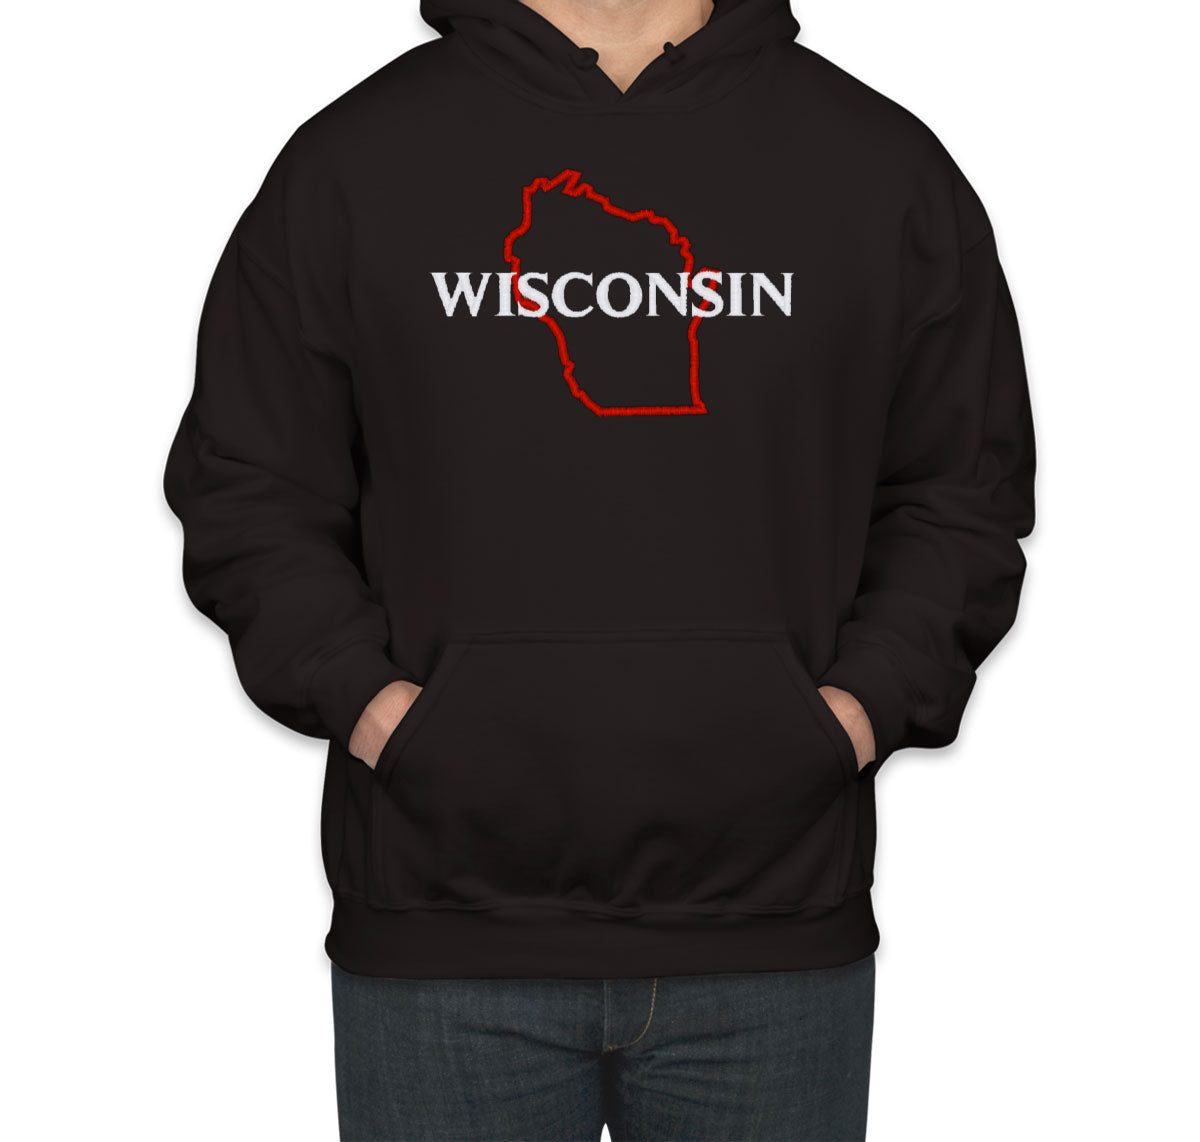 Wisconsin Embroidered Unisex Hoodie